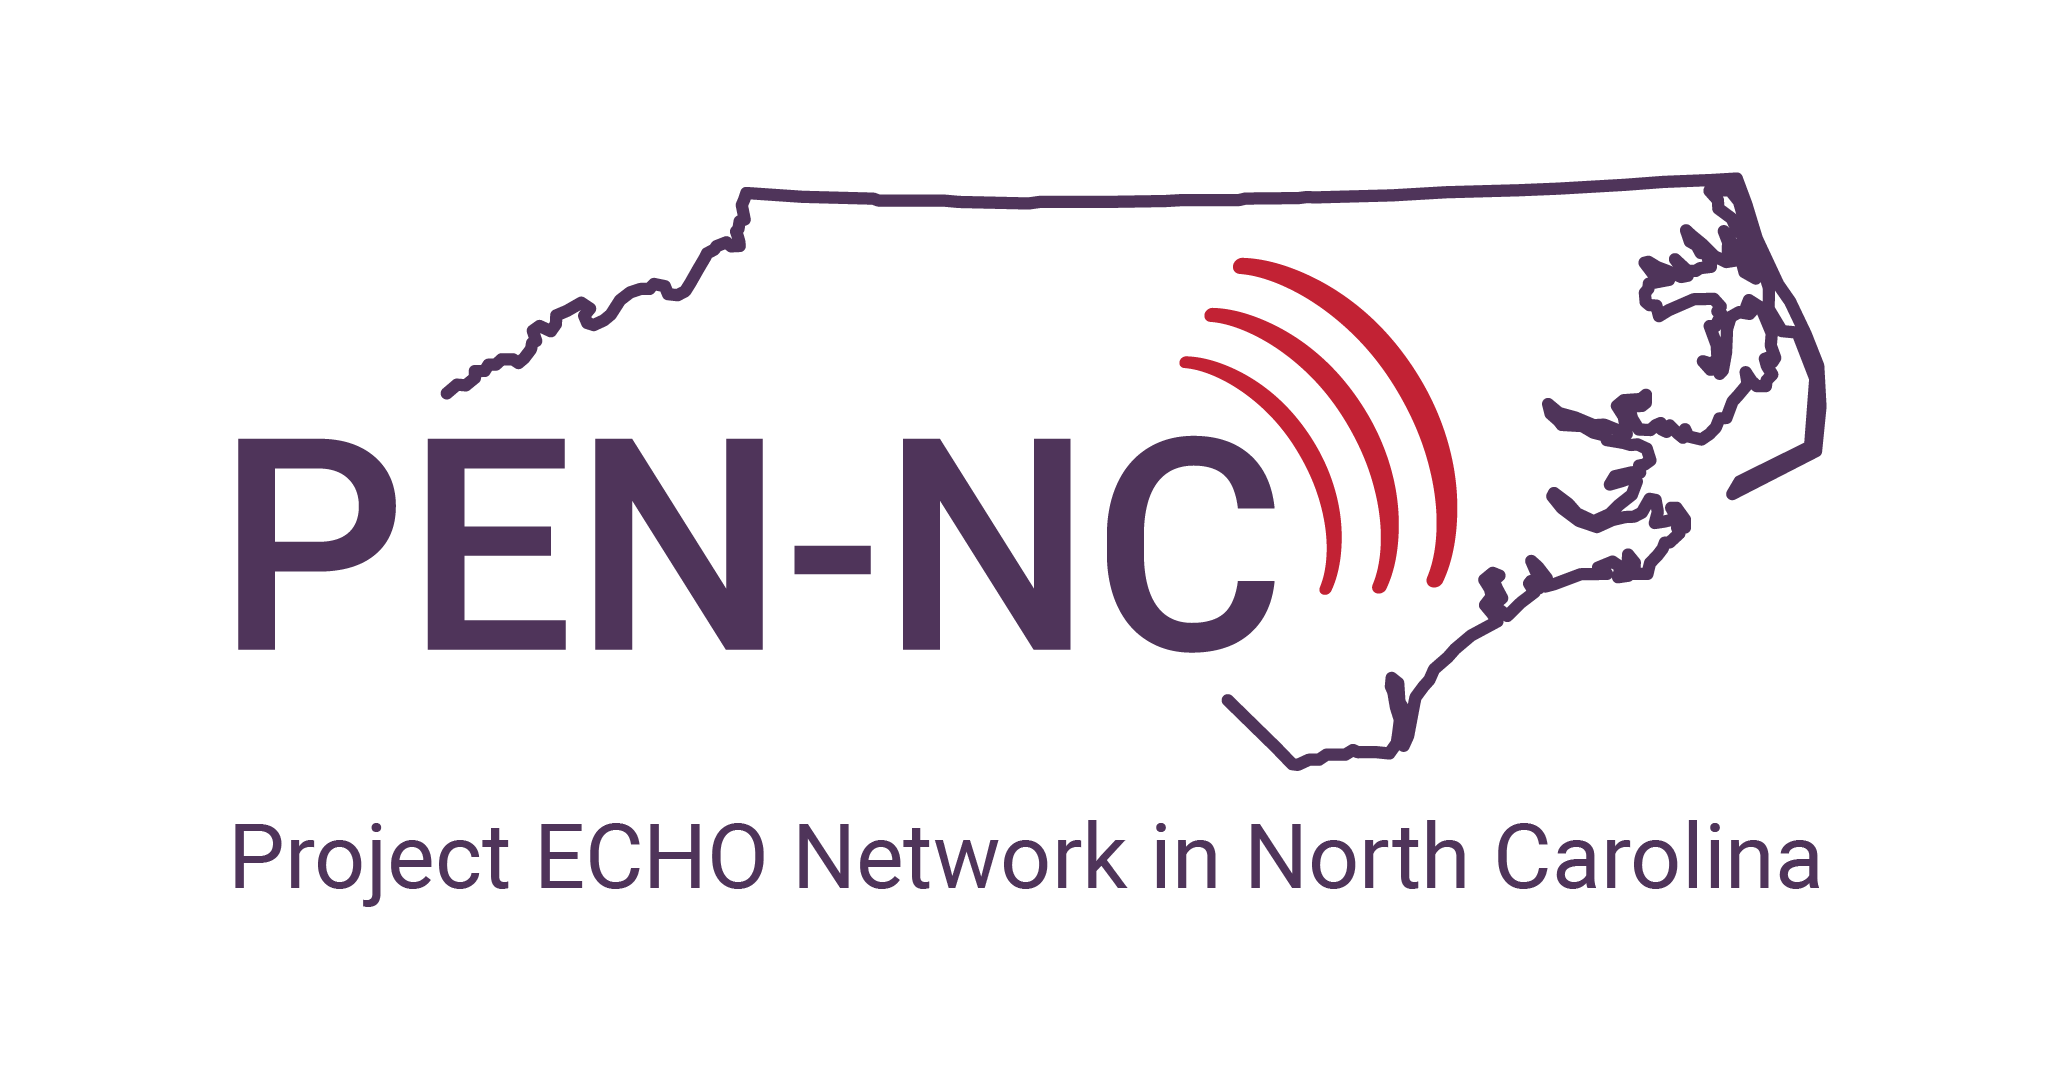 What is the Project ECHO Network in North Carolina? Image